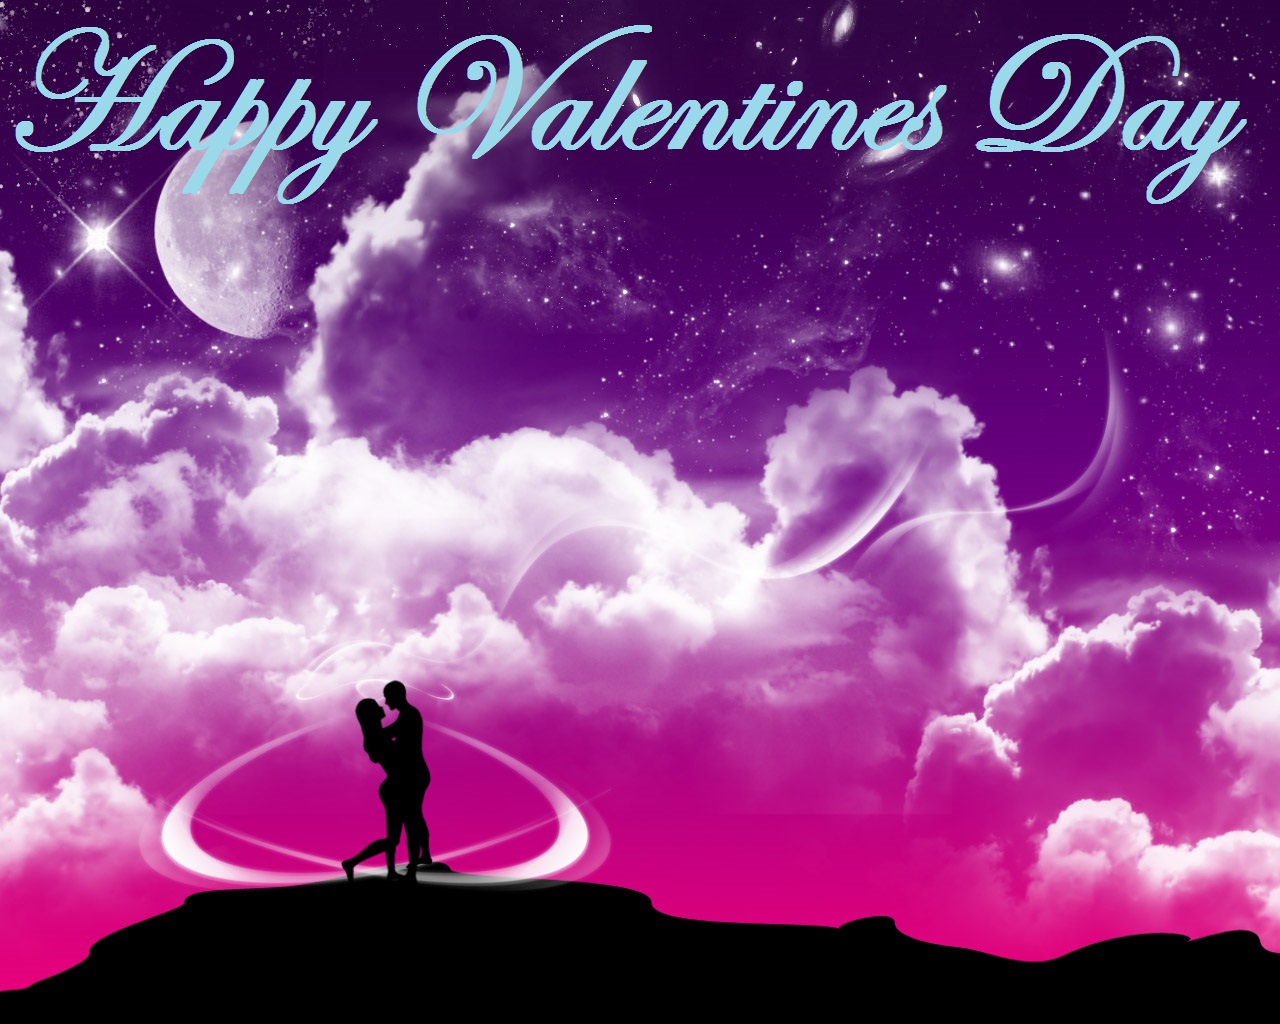 Happy Valentines day image of a couple with pink sky